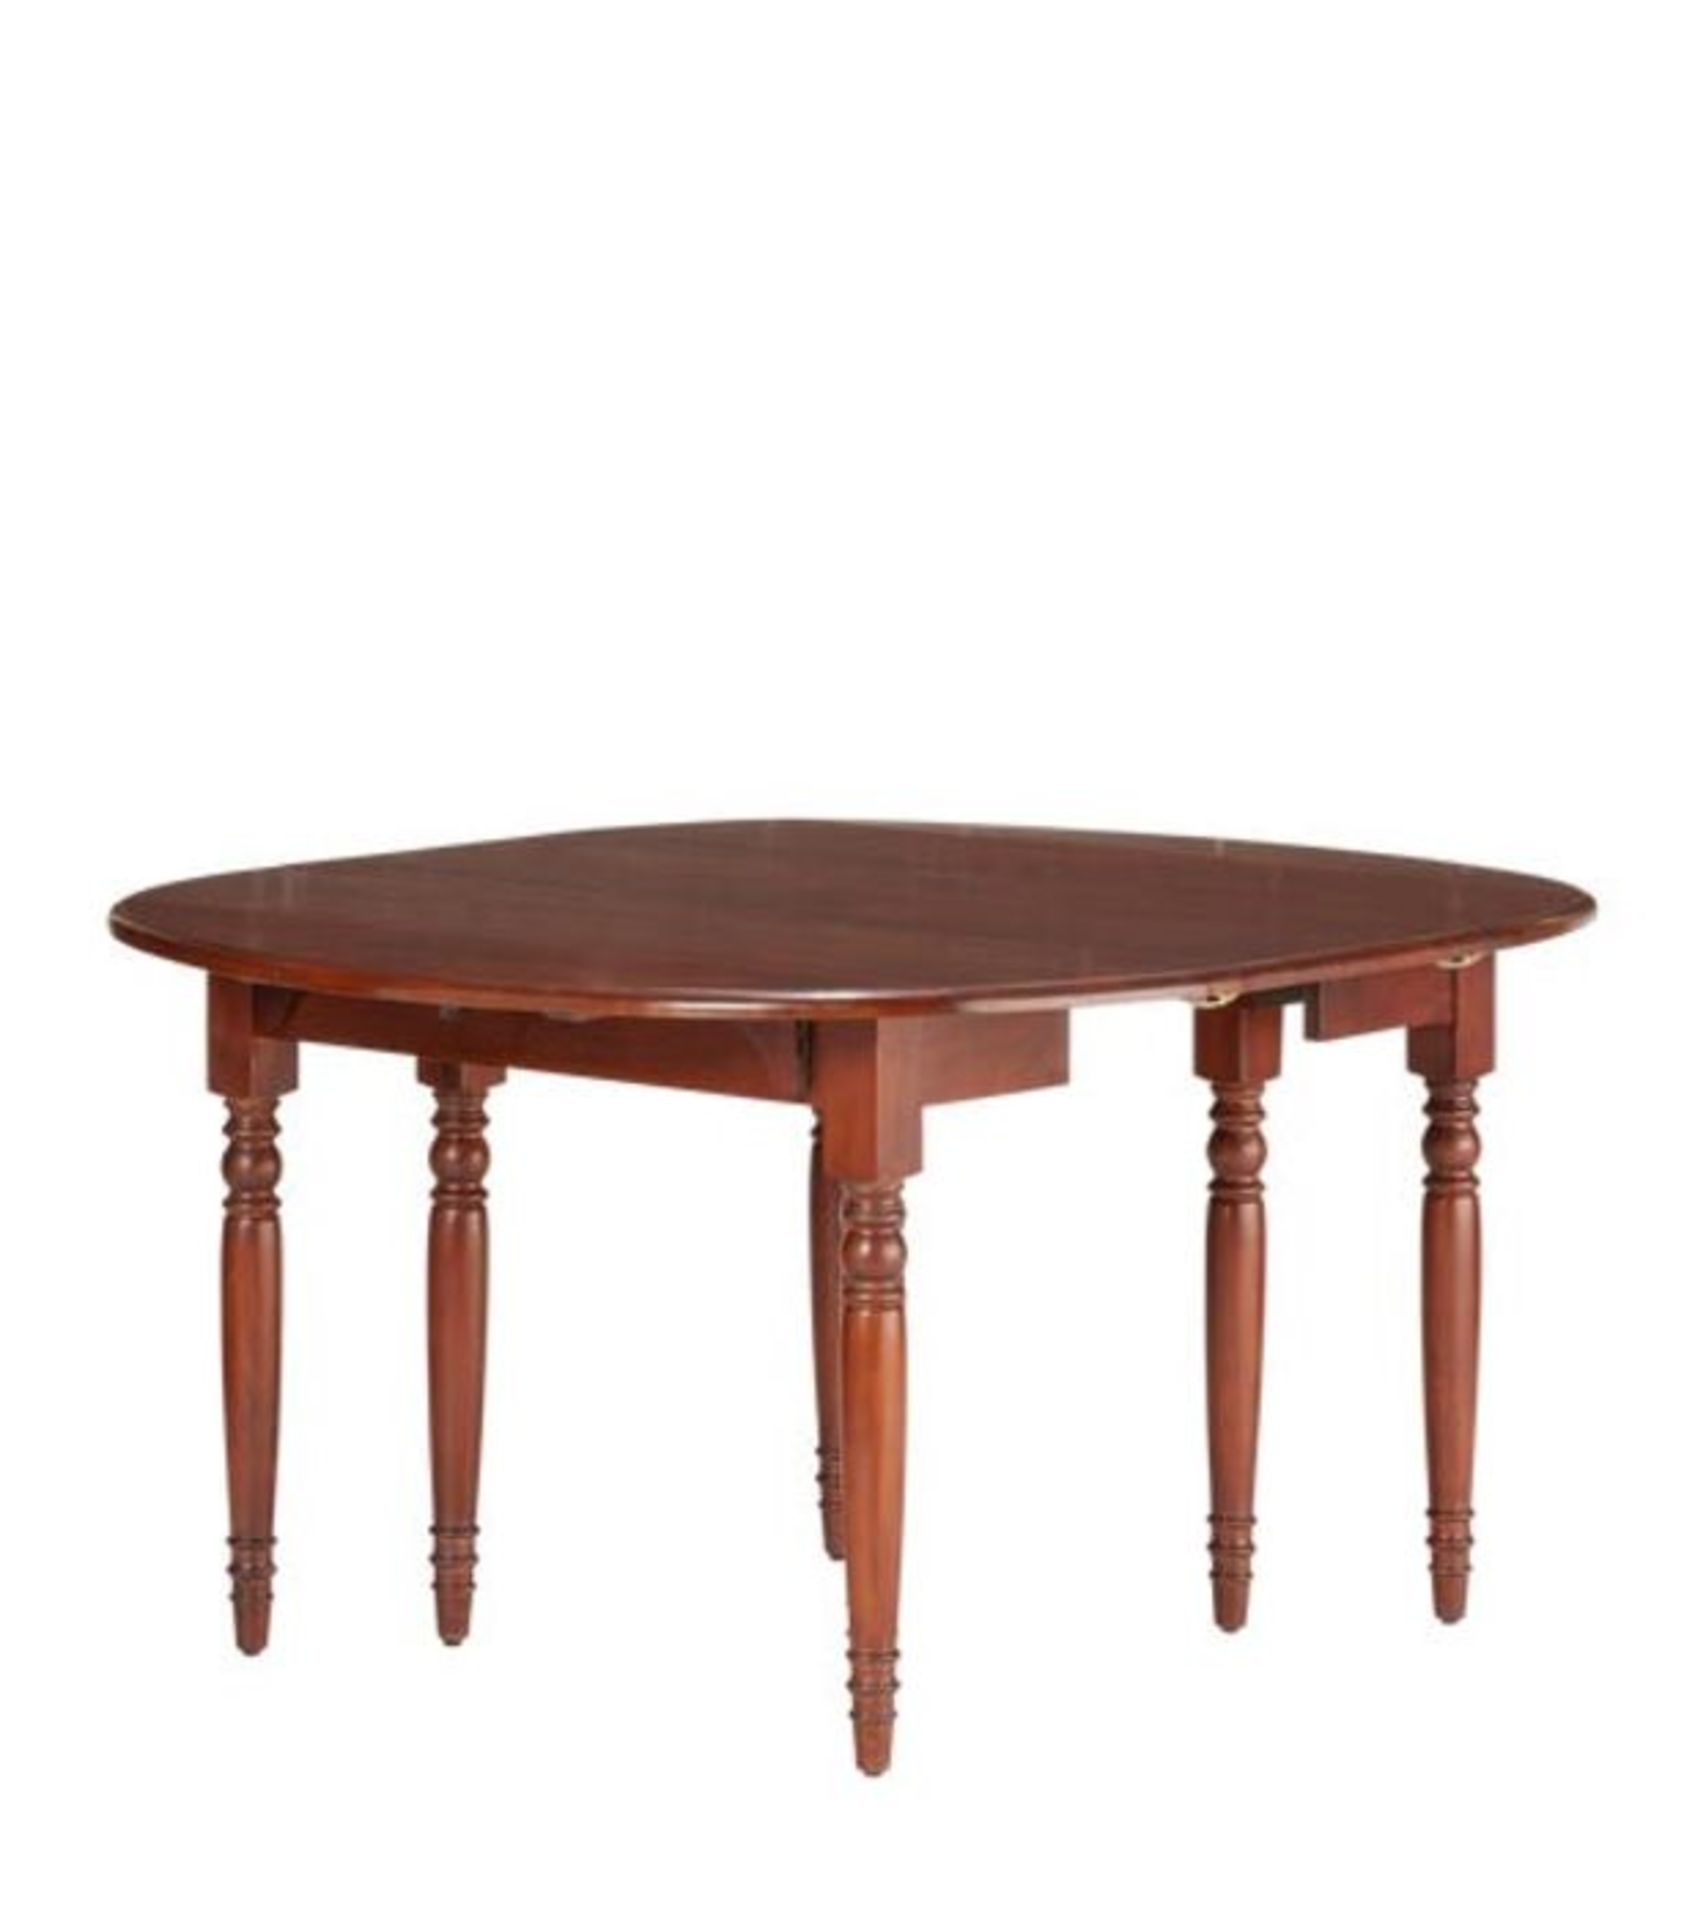 Oka Petworth Dining Table French Walnut Extending Seats 12 RRP 2950.00 - Image 6 of 8